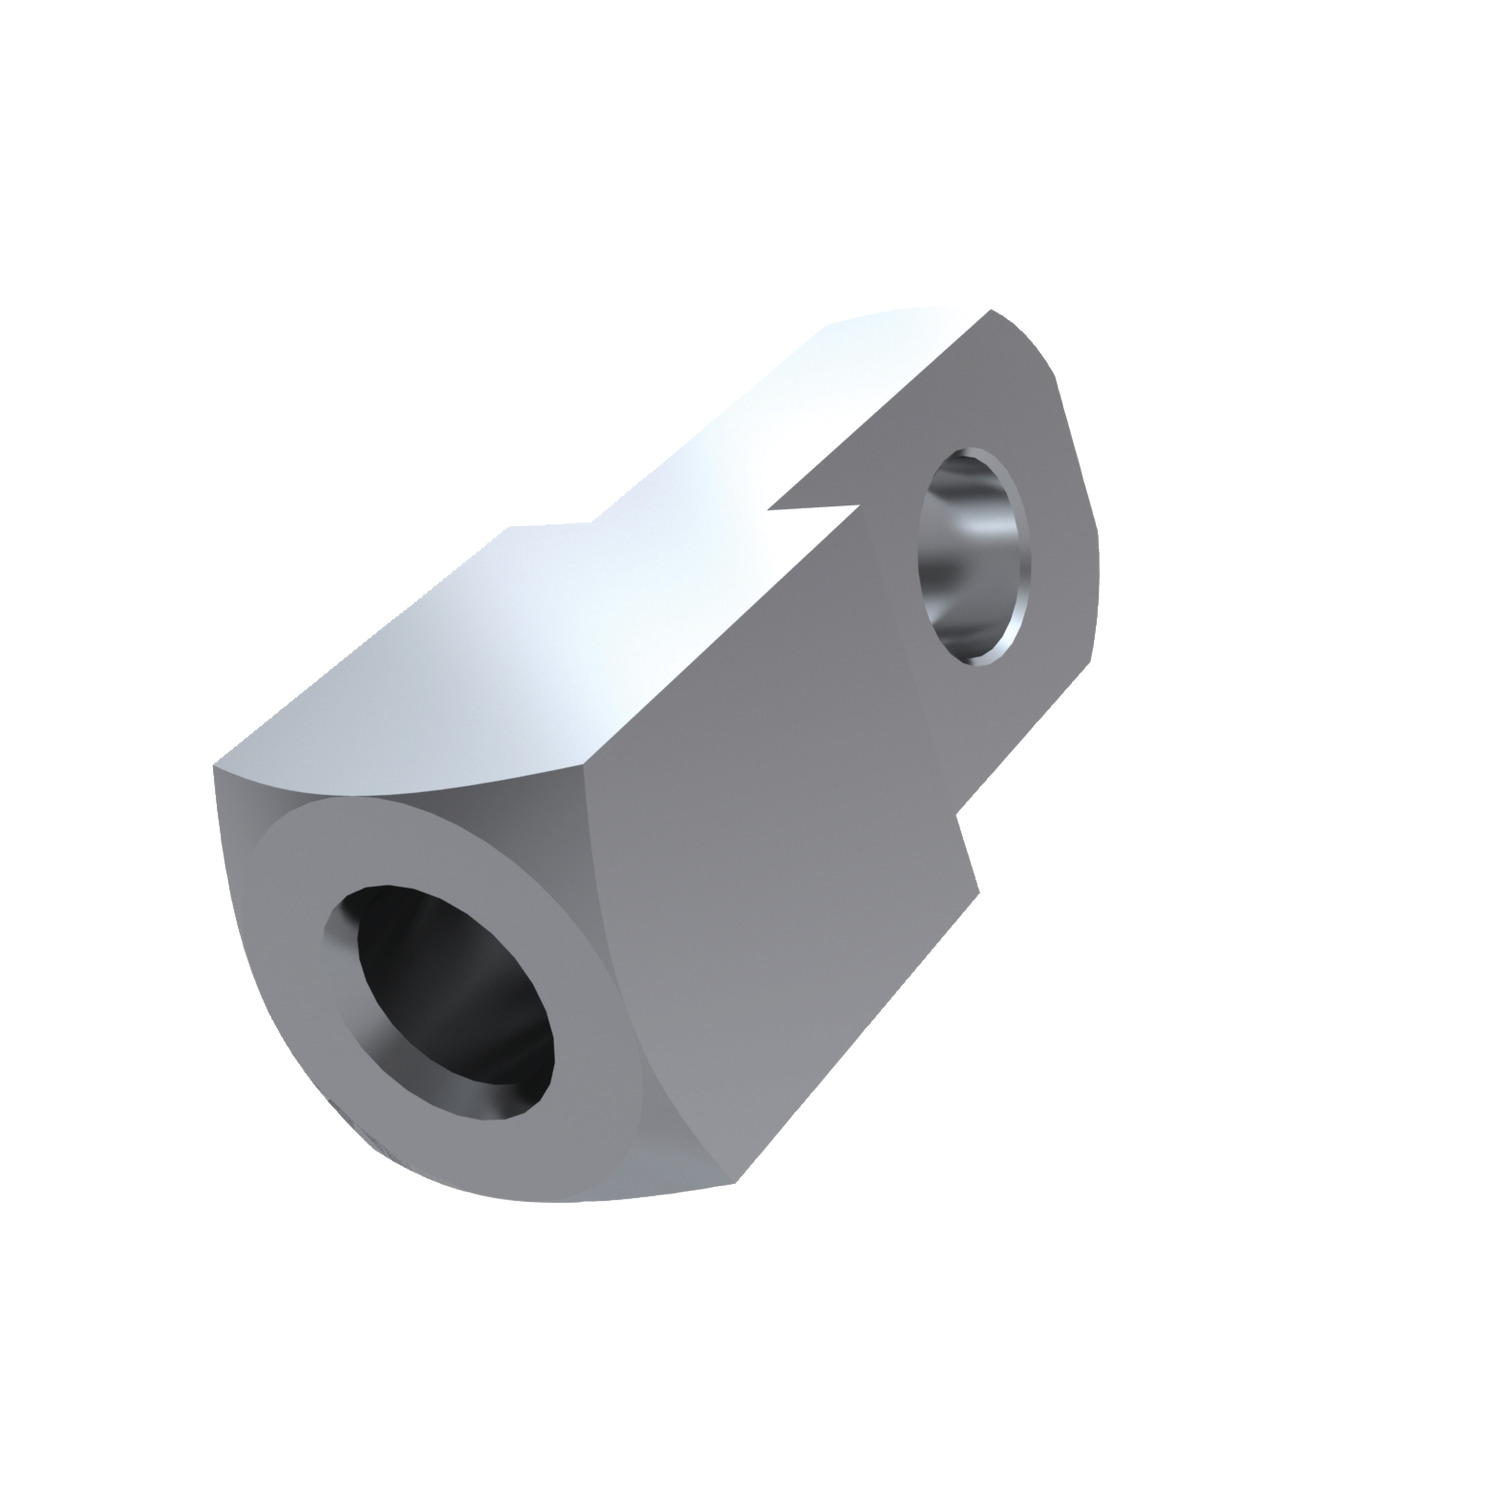 Product 65652, Mating Piece for Clevis Joints silver zinc plated / 